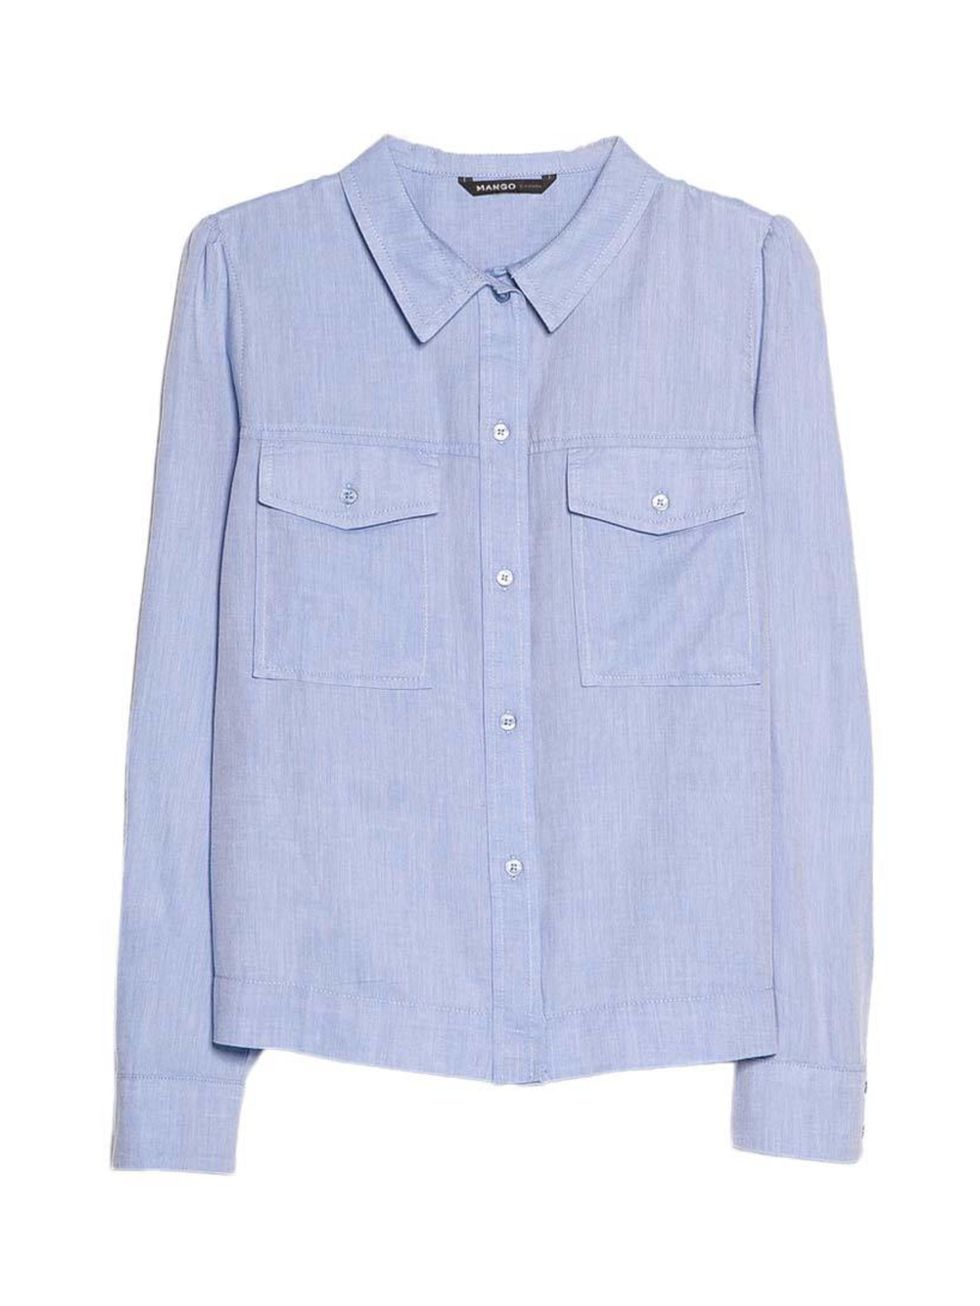 <p>Wear with rolled-up chinos and a mannish watch.</p>

<p> </p>

<p><a href="http://shop.mango.com/GB/p0/women/clothing/blouses-and-shirts/puffed-shoulder-shirt/?id=33045587_80&n=1&s=prendas.blusas&ident=0__0_1411055756670&ts=1411055756670" target="_blan